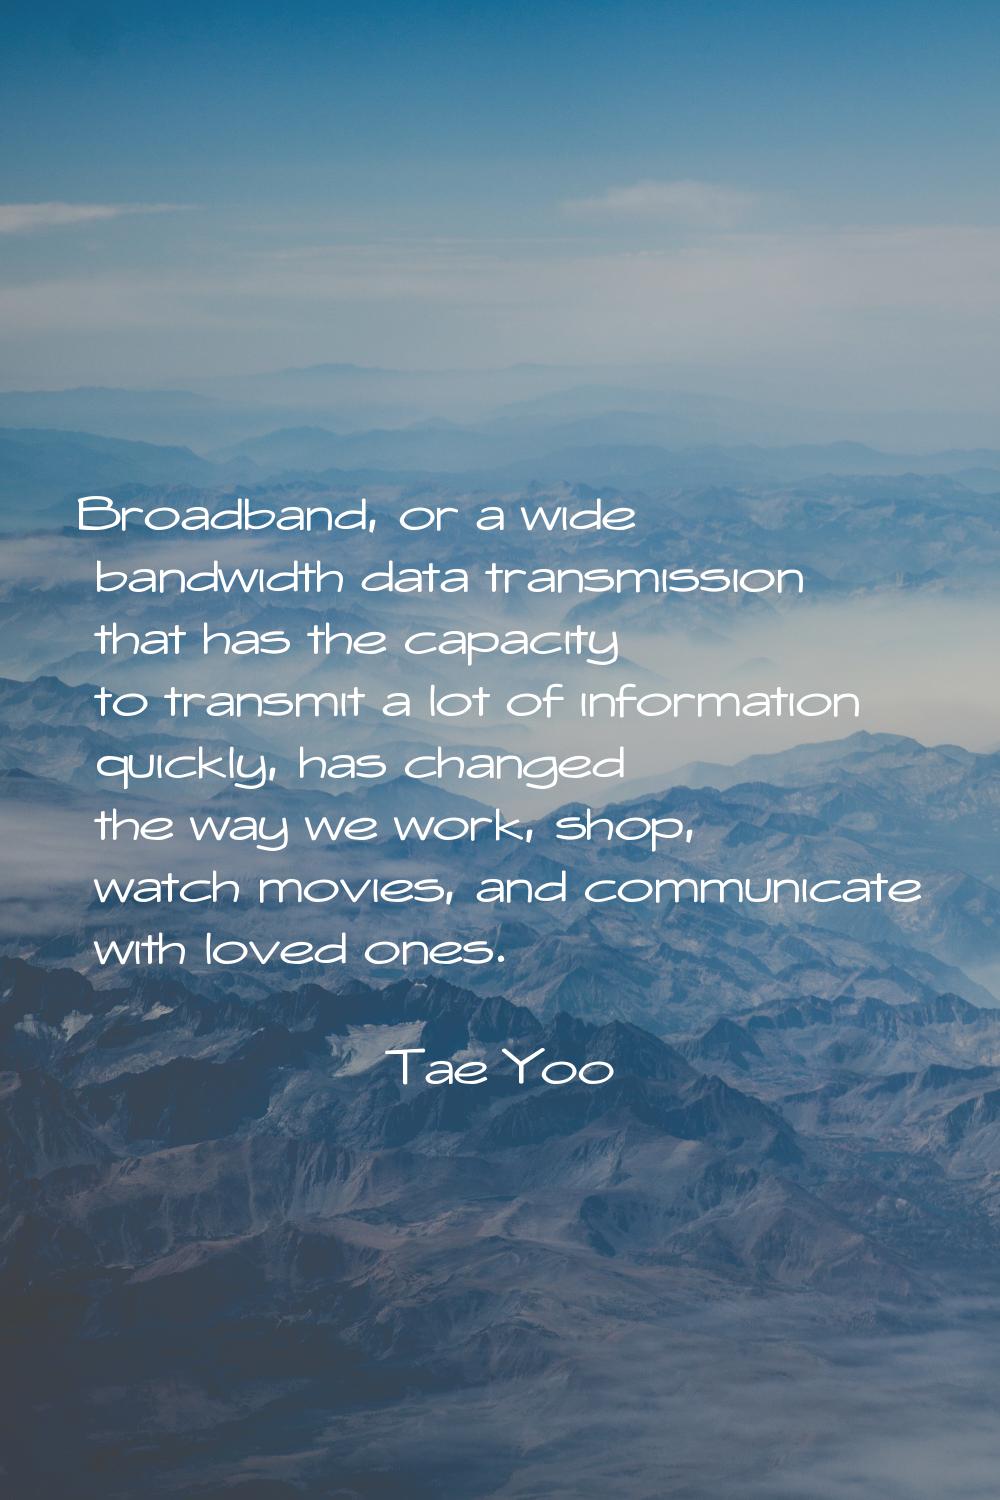 Broadband, or a wide bandwidth data transmission that has the capacity to transmit a lot of informa